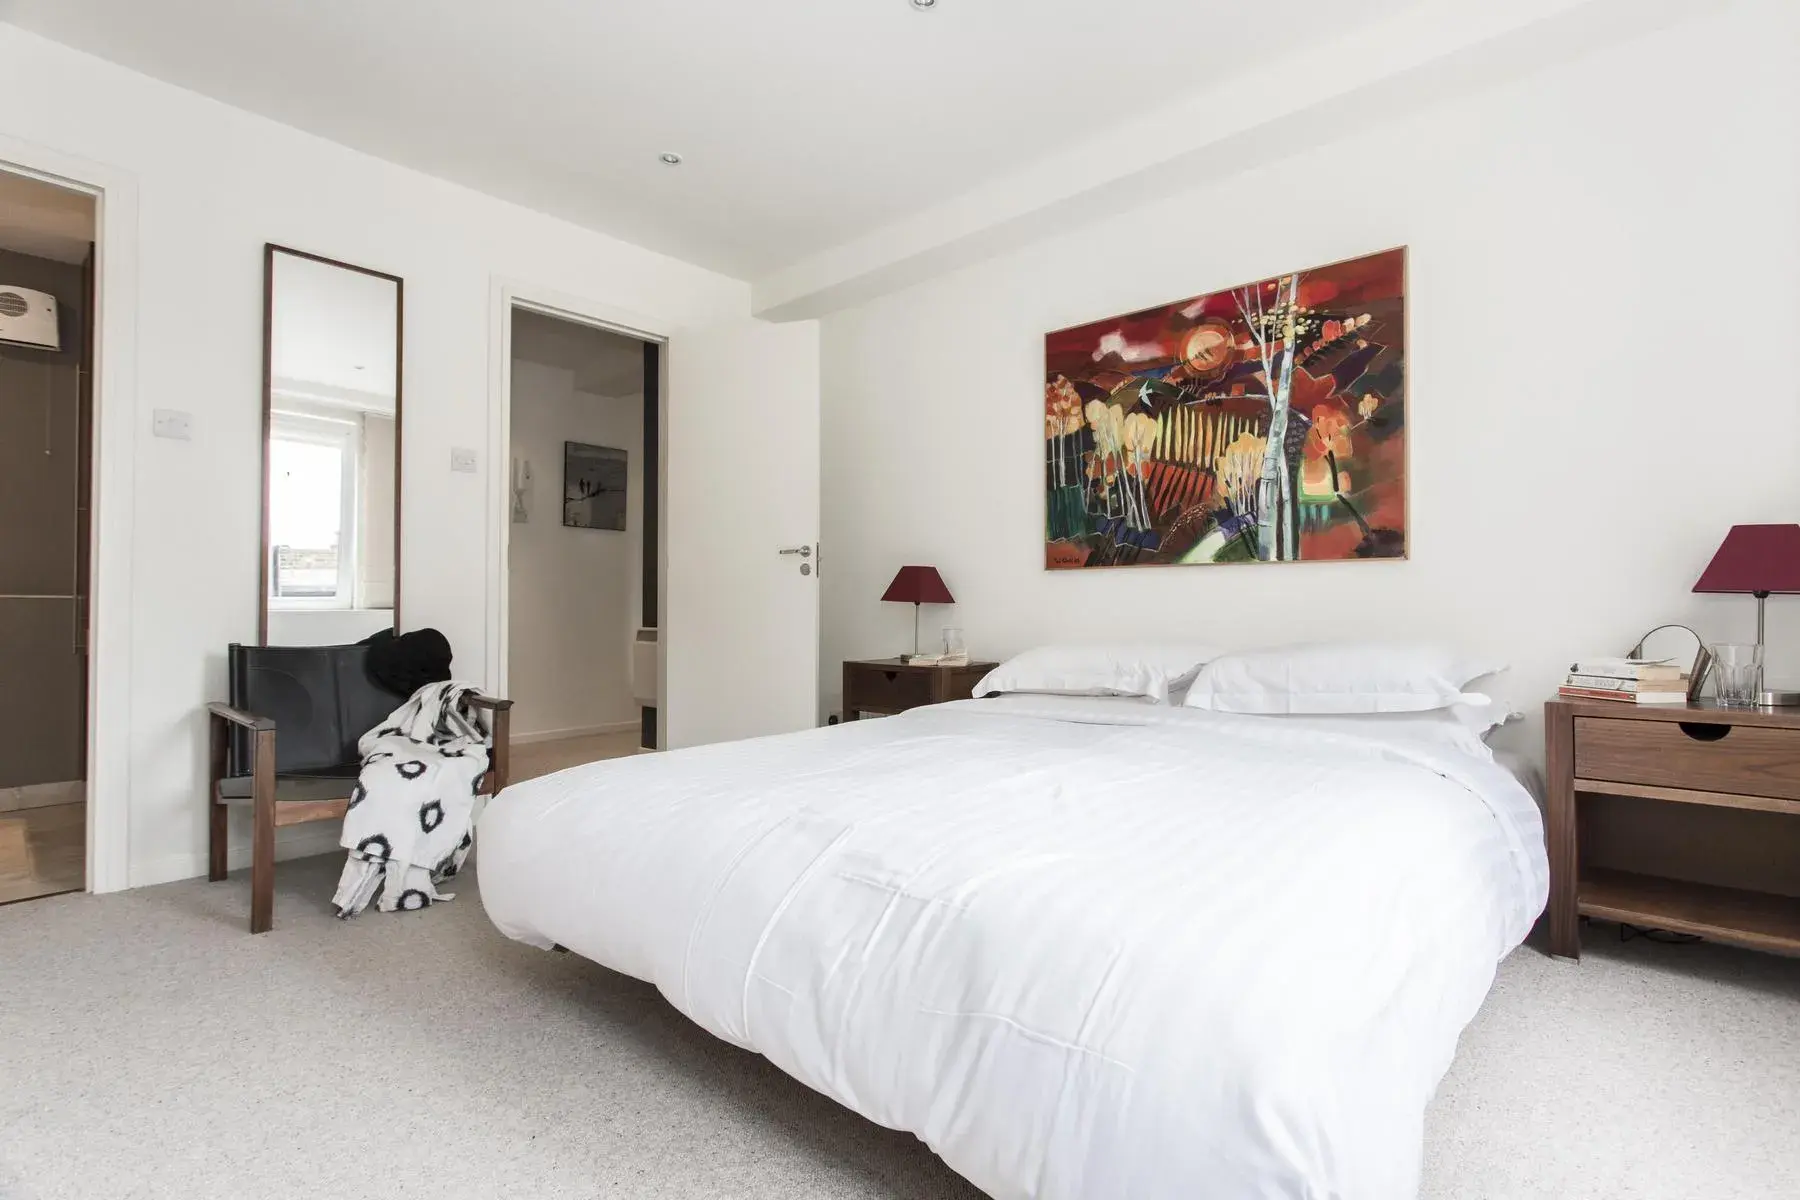 Lambs Conduit Street, holiday home in Holborn, London